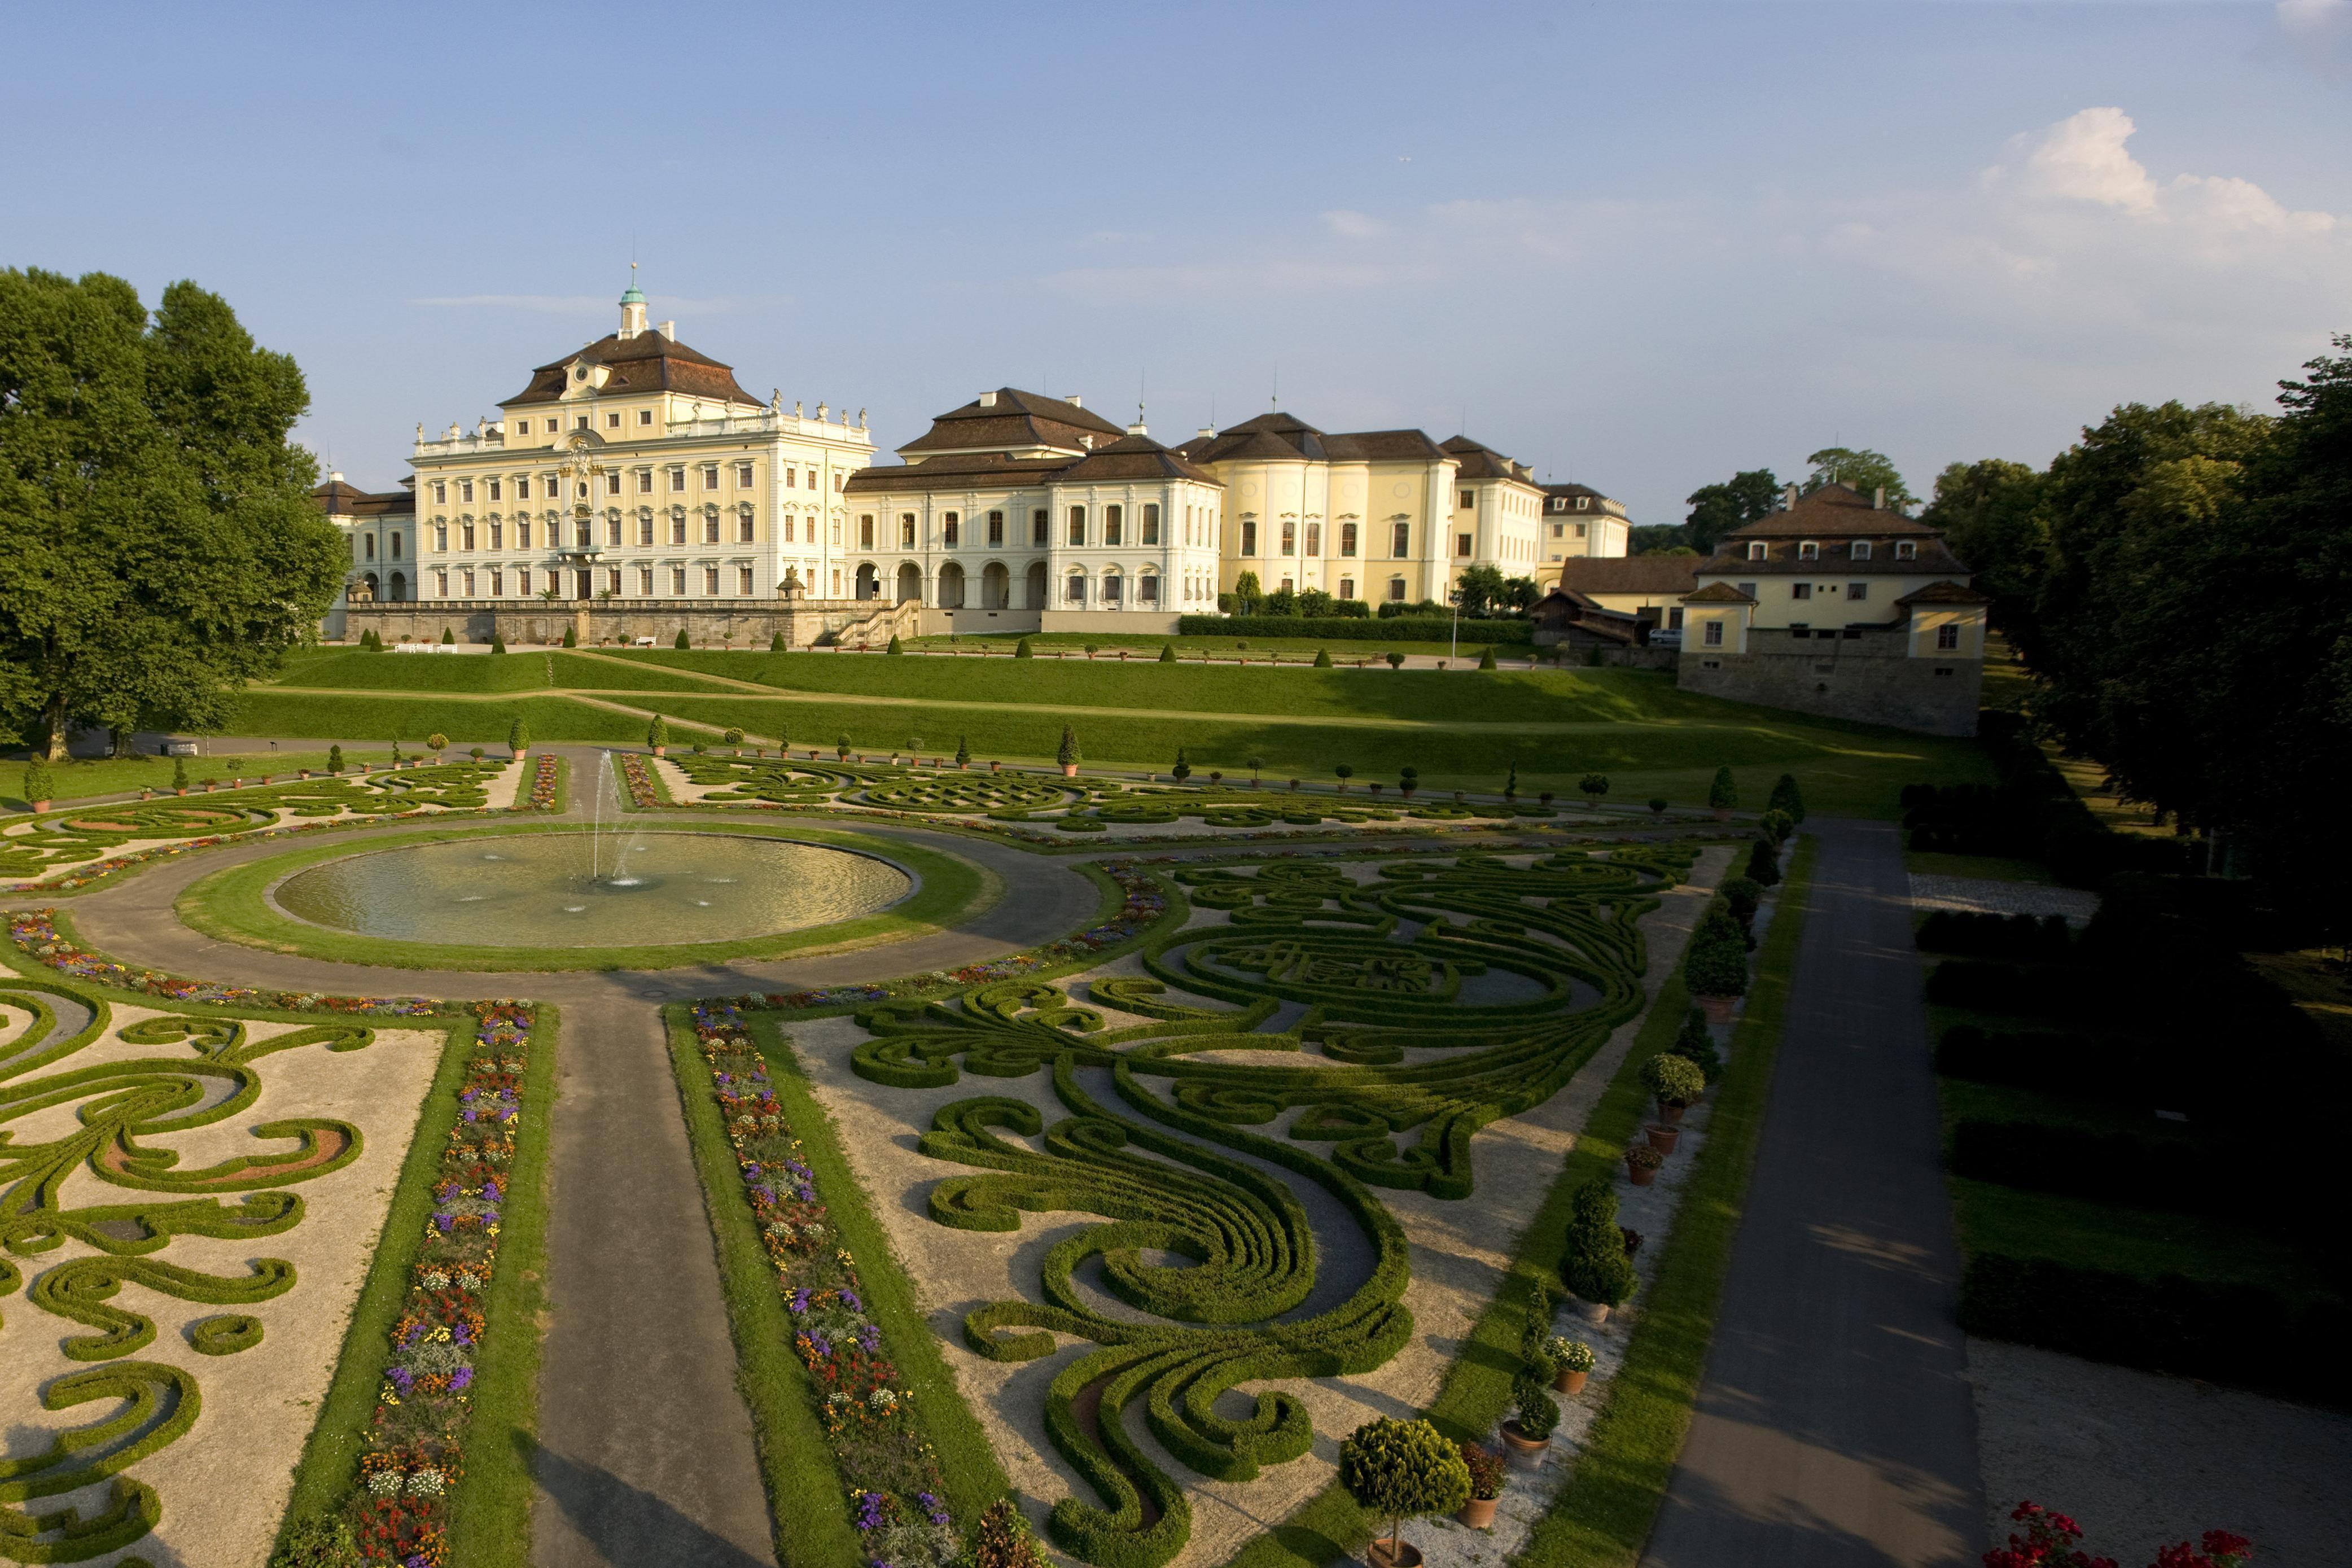 Old central building and kitchen building at Ludwigsburg Residential Palace